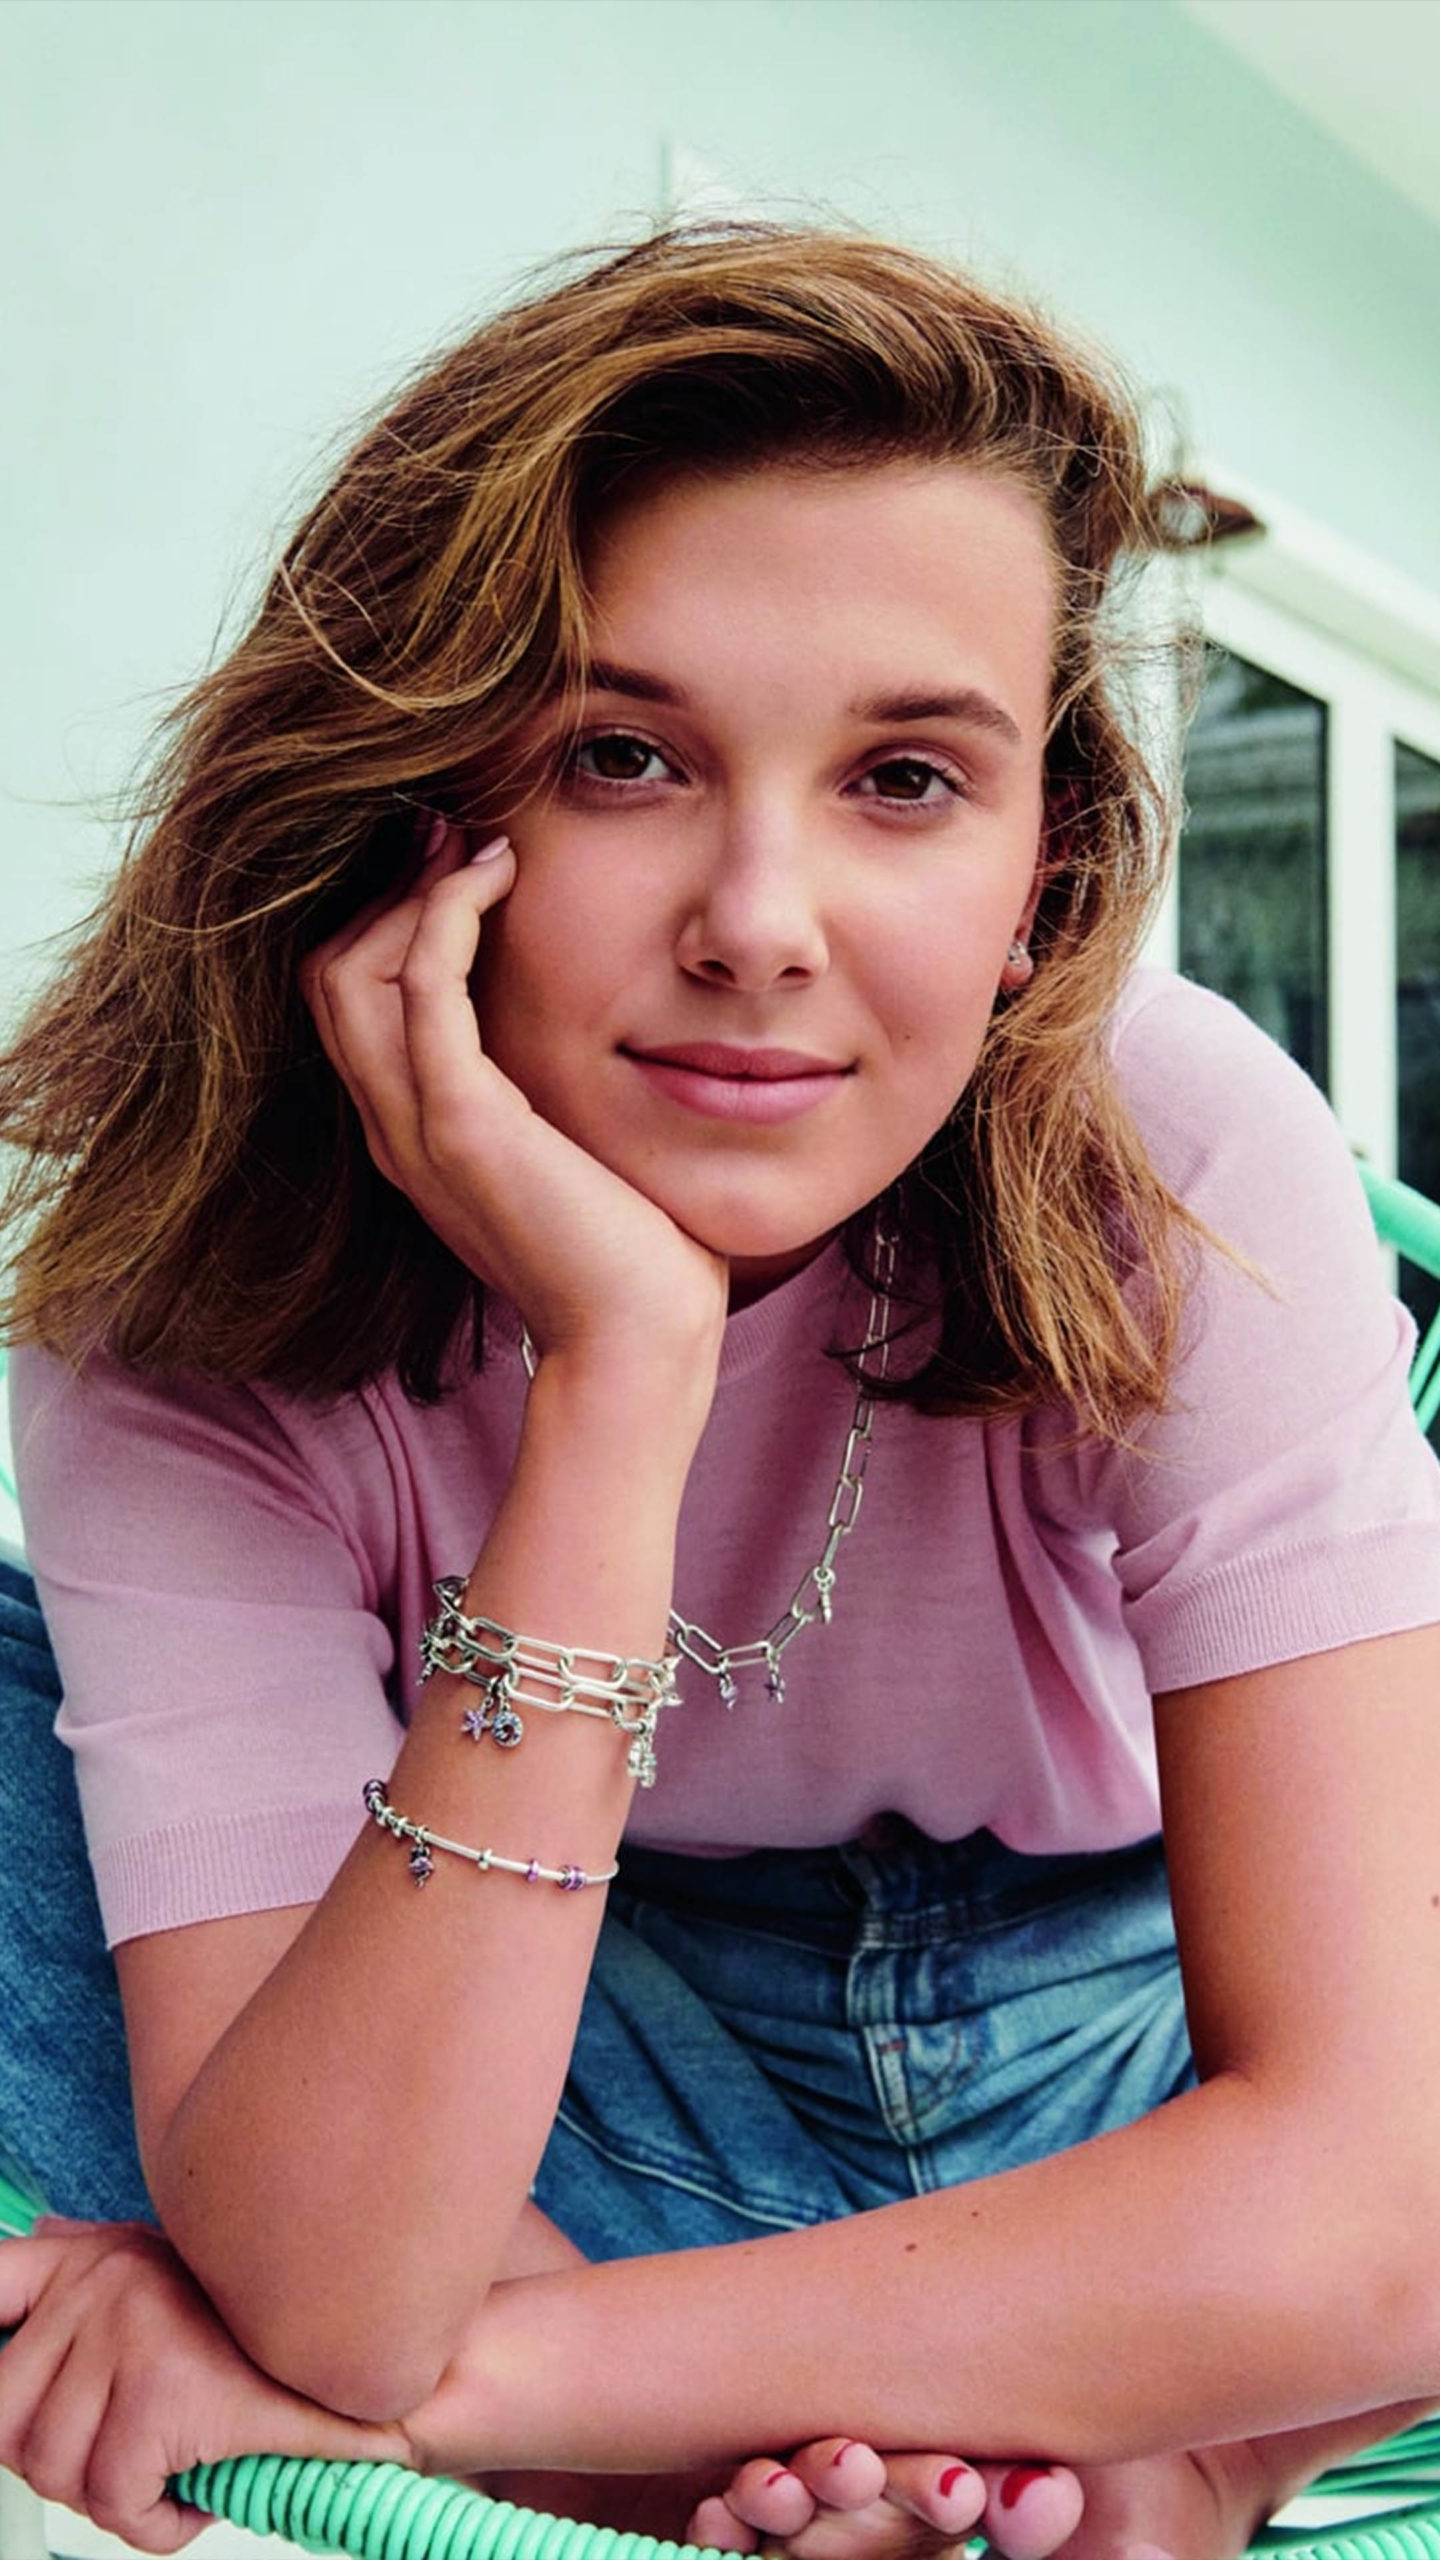 Take a look at the top ten photo of Millie Bobby Brown UBJ Business Journal